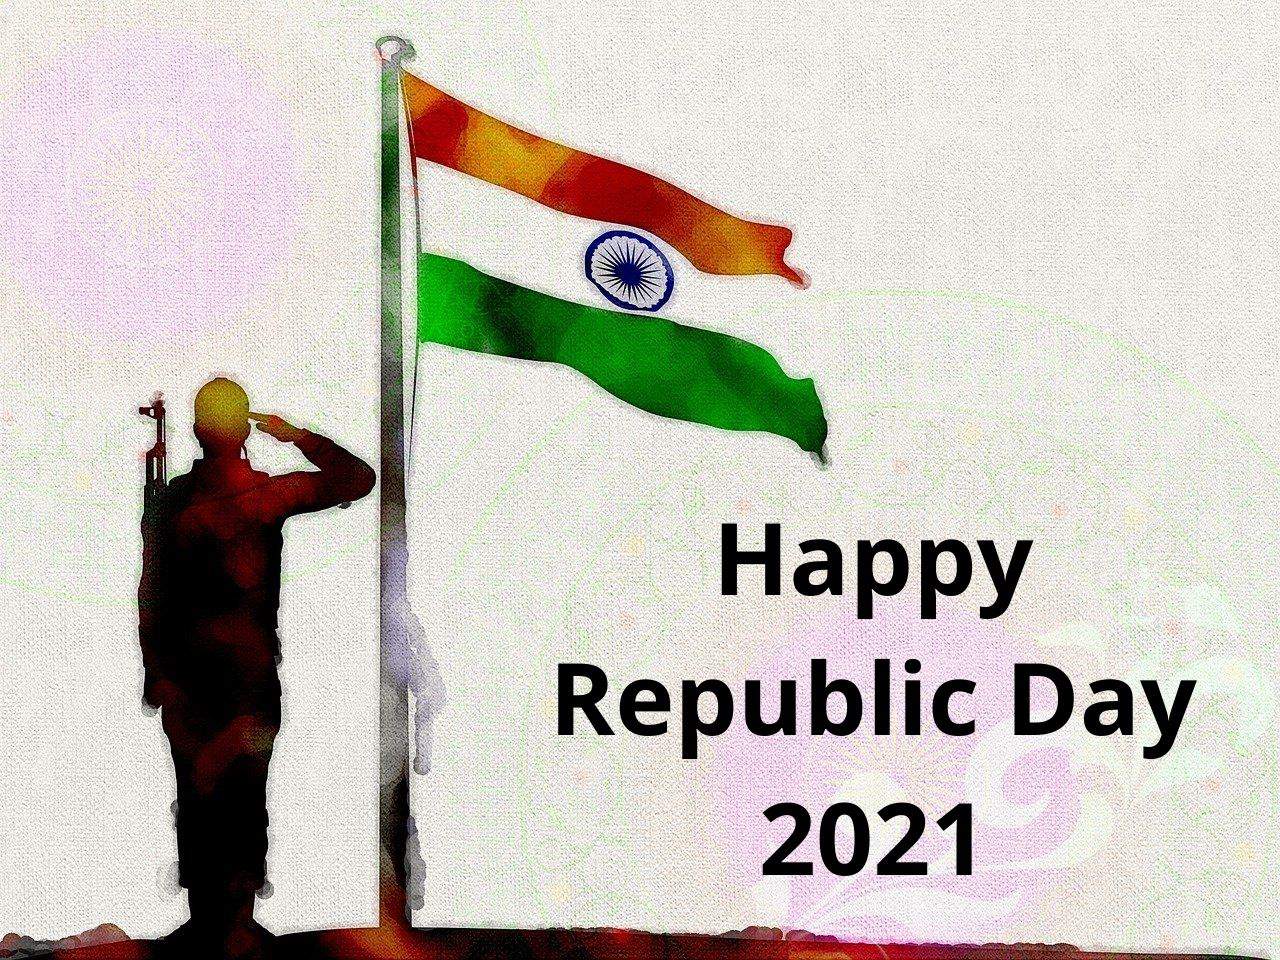 Happy Republic Day 2021 Wishes, Quotes, Greetings, Status